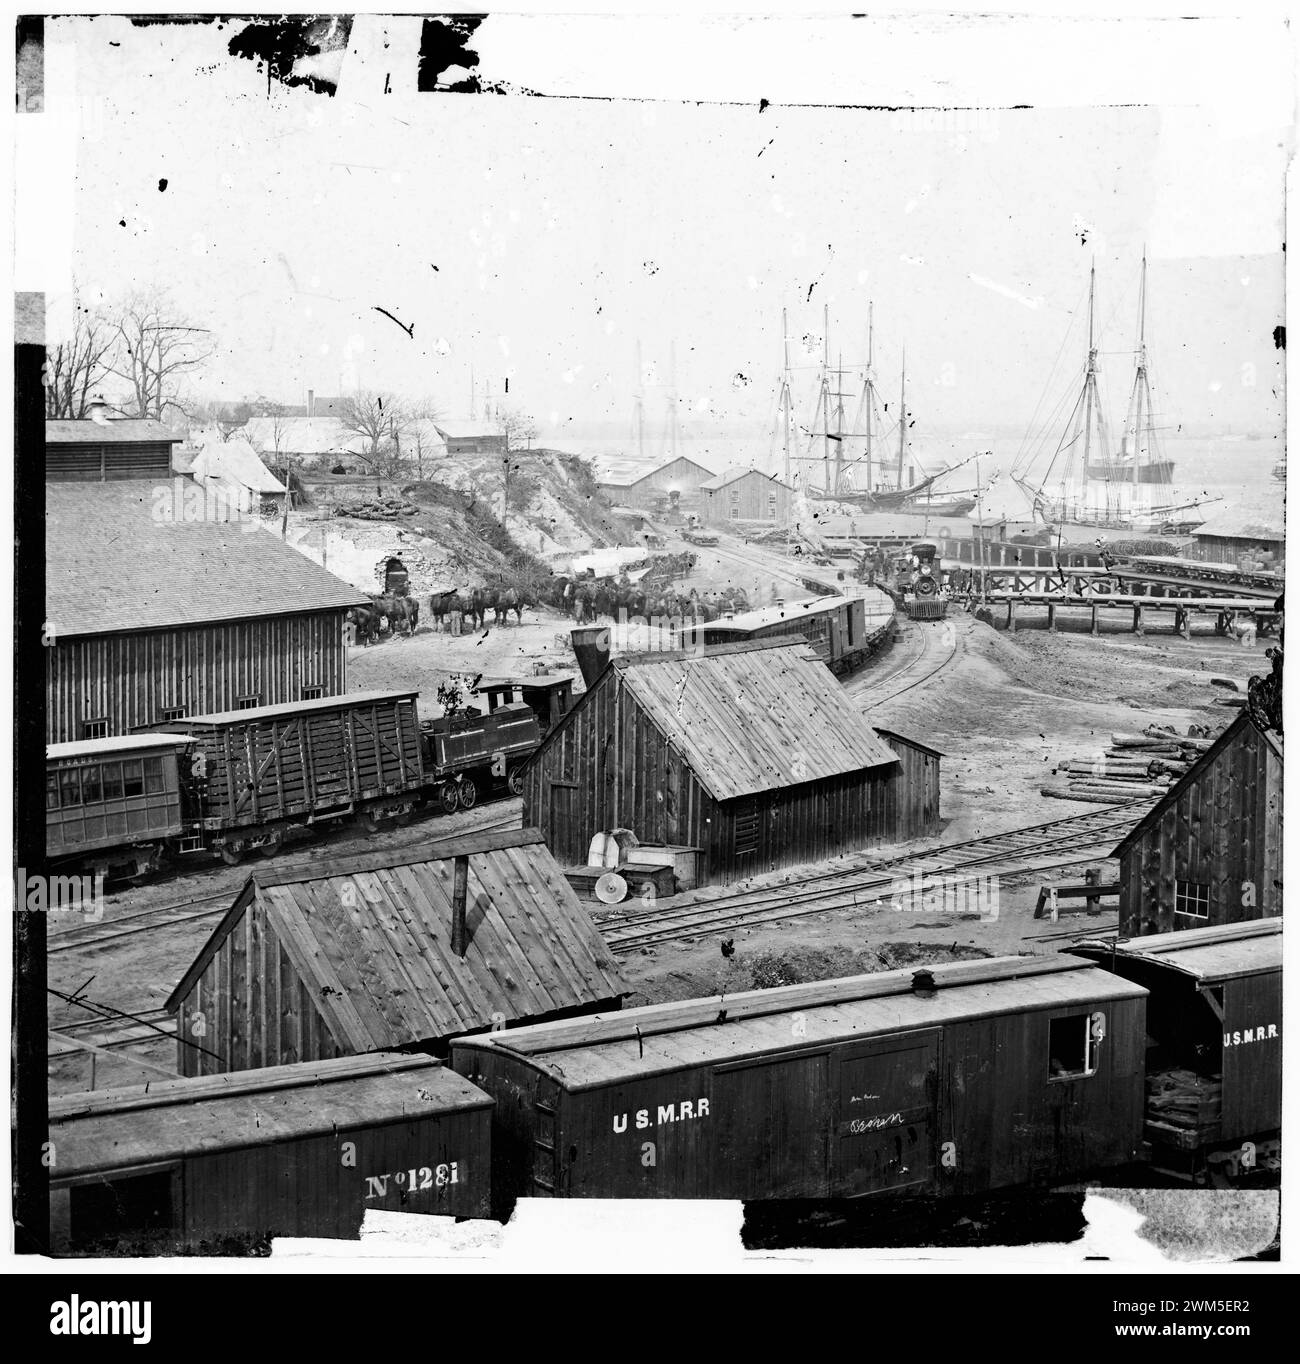 City Point, Virginia. Railroad yard and transports, 1860s - very vintage photo Stock Photo